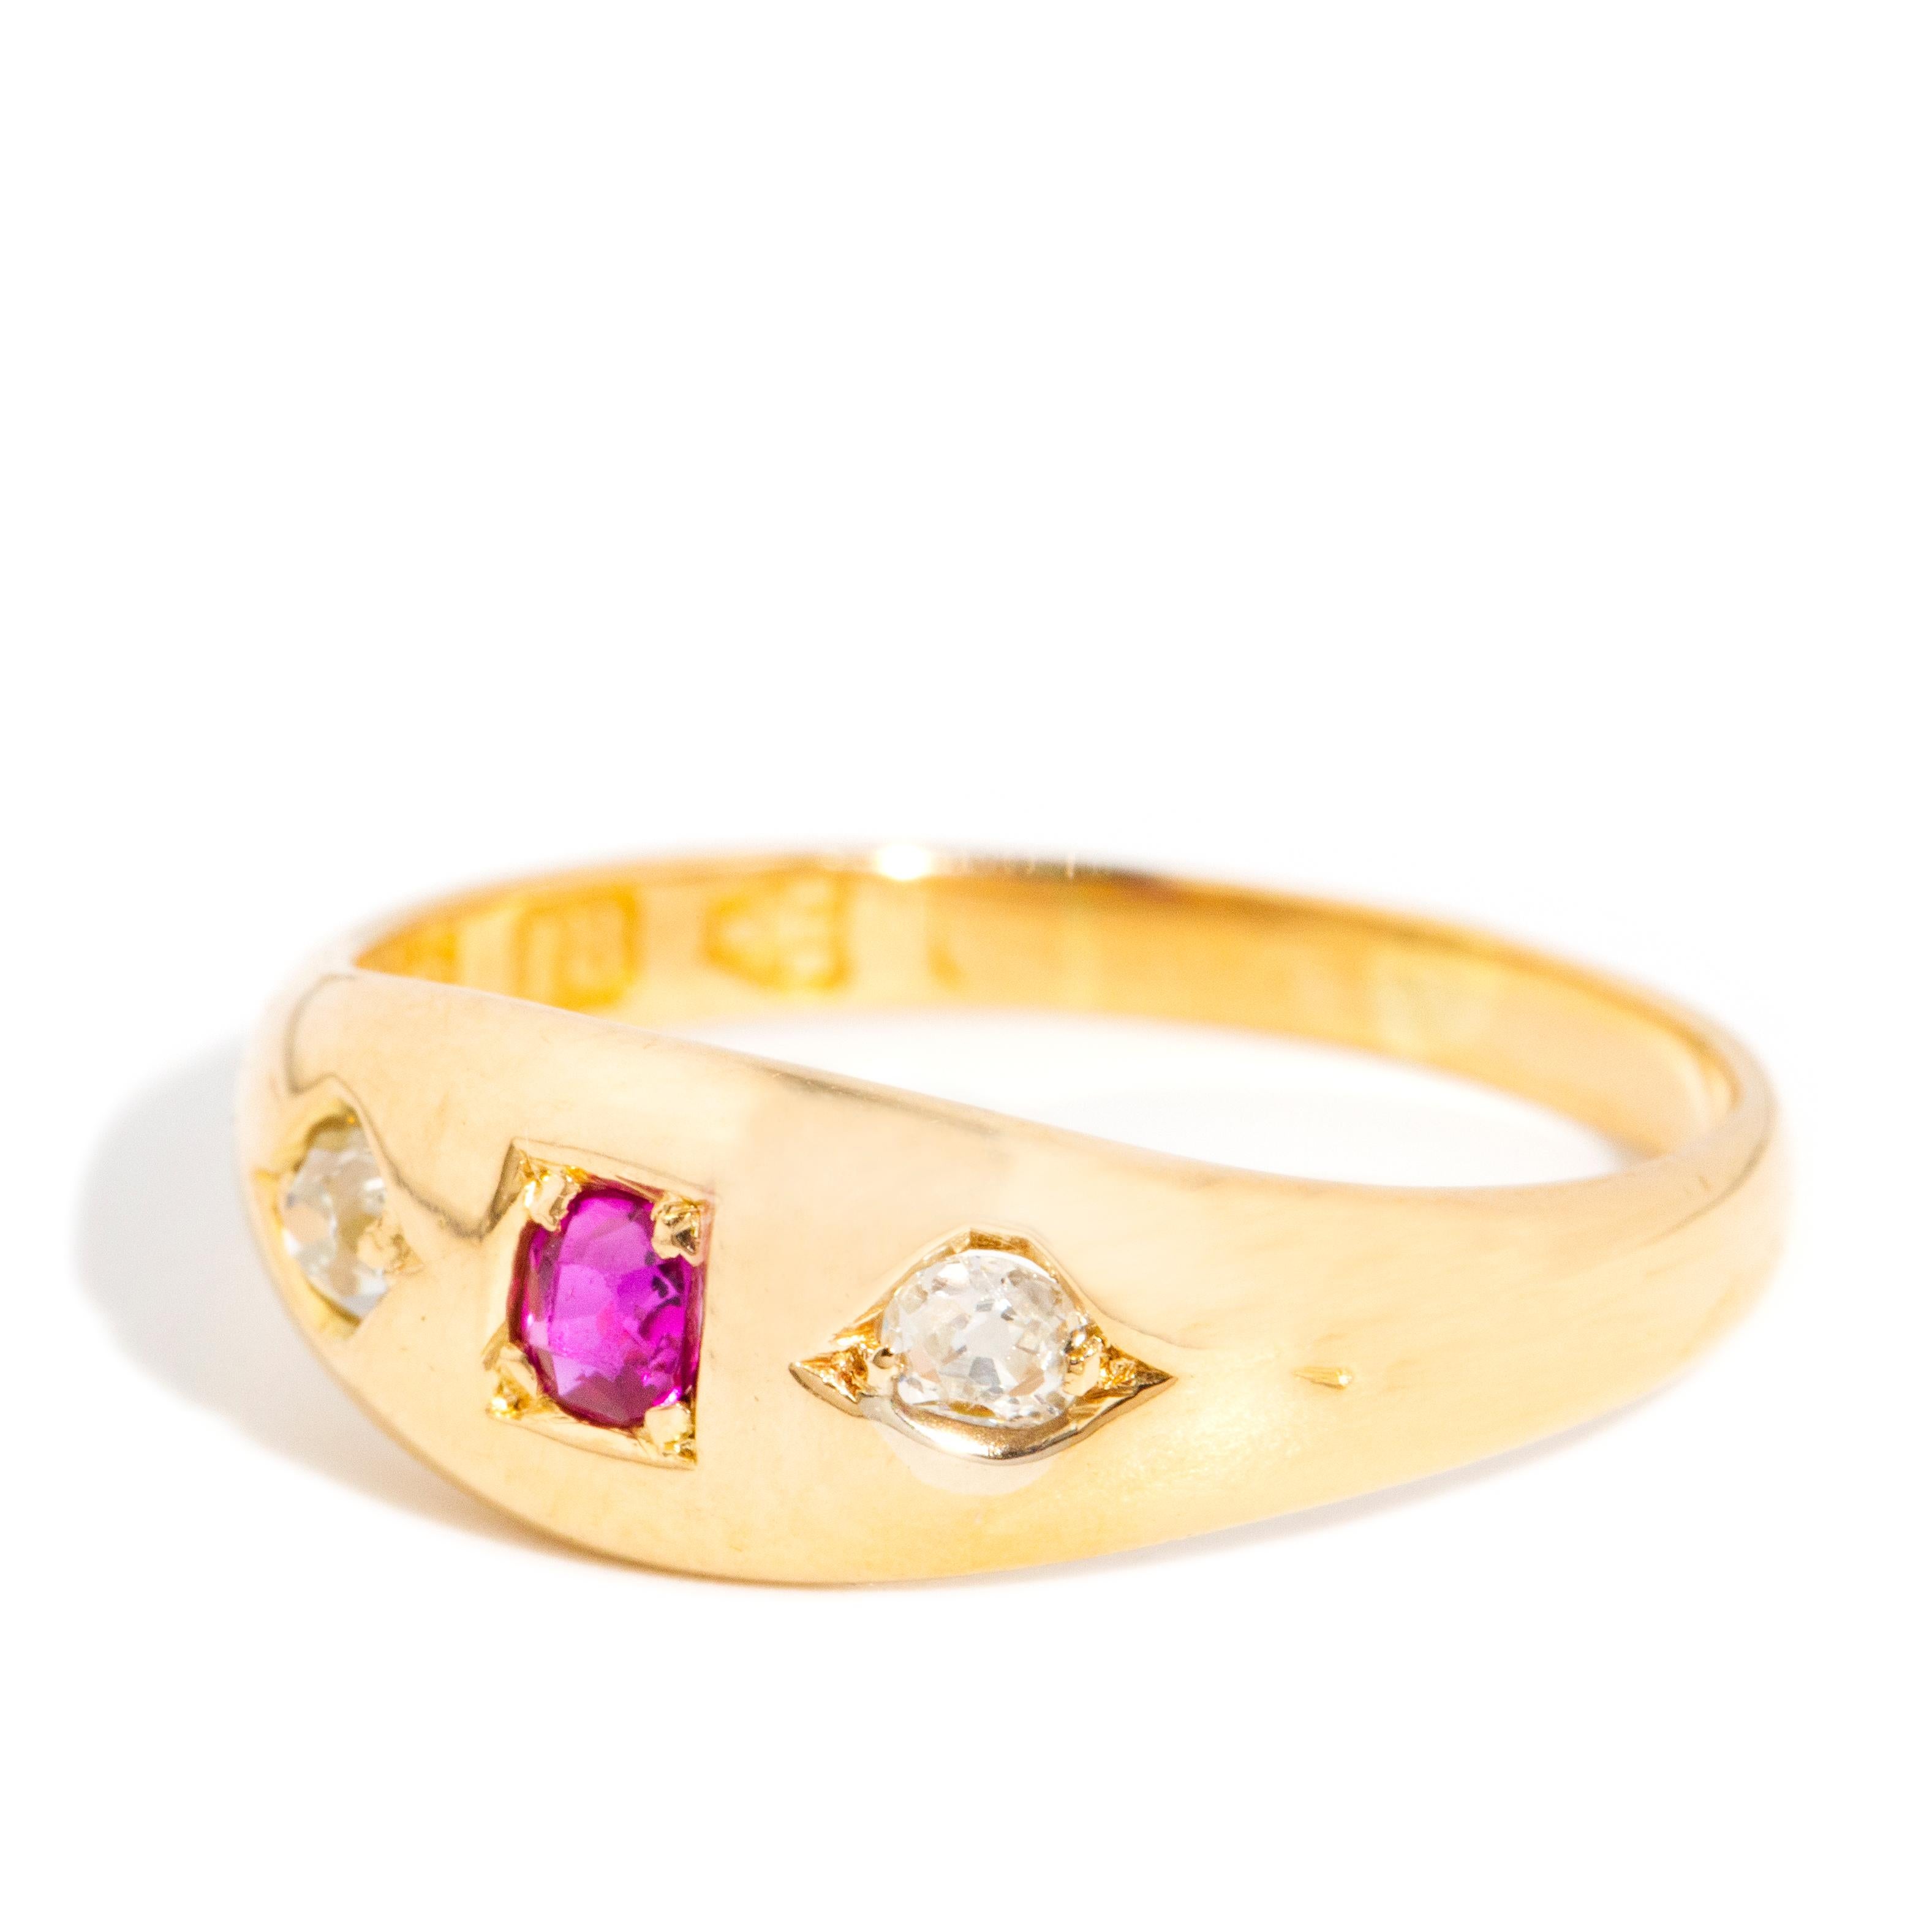 Antique Victorian Era Bright Red Pink Ruby & Old Cut Diamond Ring 18 Carat Gold In Good Condition For Sale In Hamilton, AU